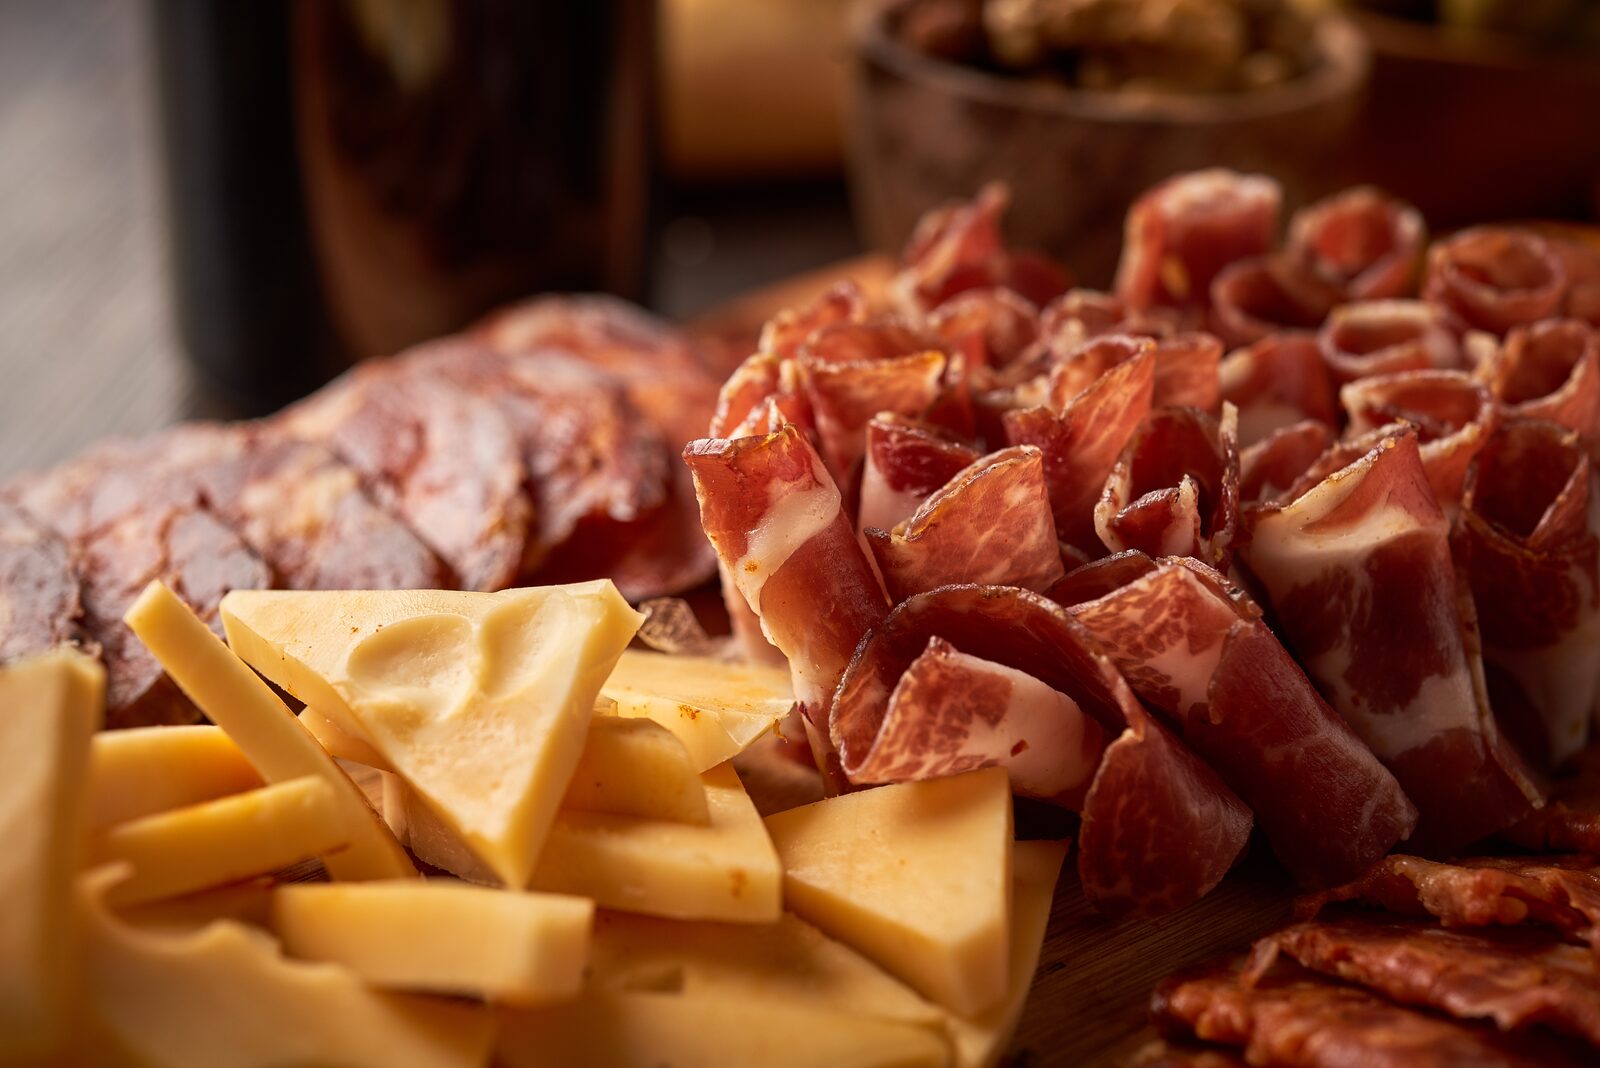 New in 2022: enjoy our cheese - and charcuterie platters